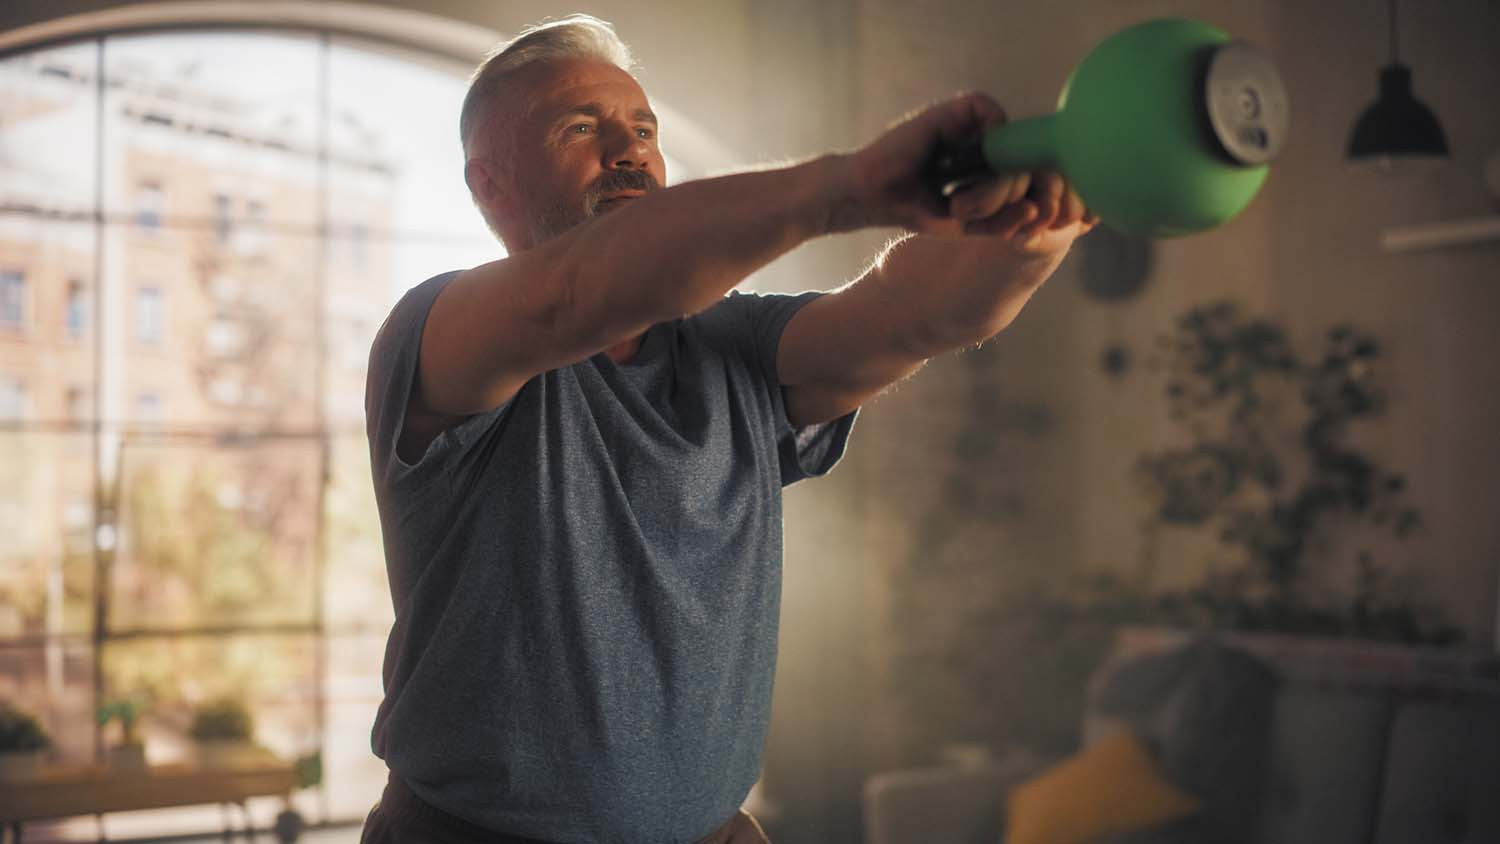 photo of a man exercising with a kettlebell in his home